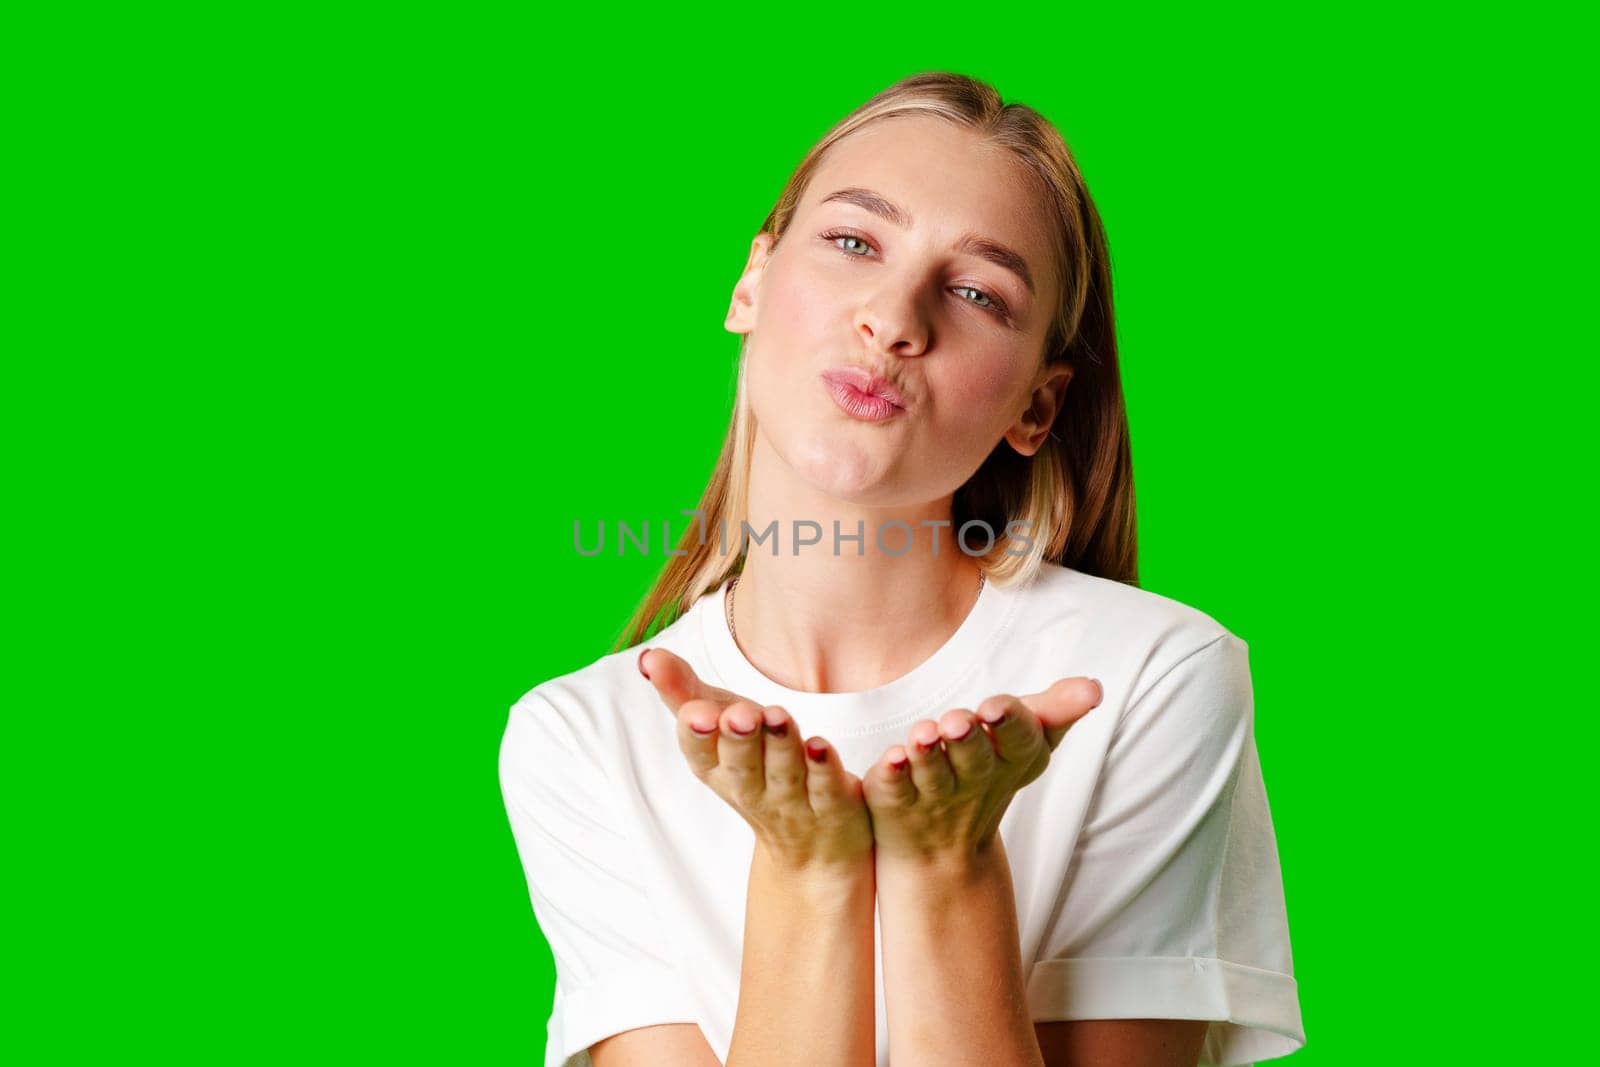 Young Woman Blowing a Kiss With a Playful Expression Against a Bright Green Background in studio